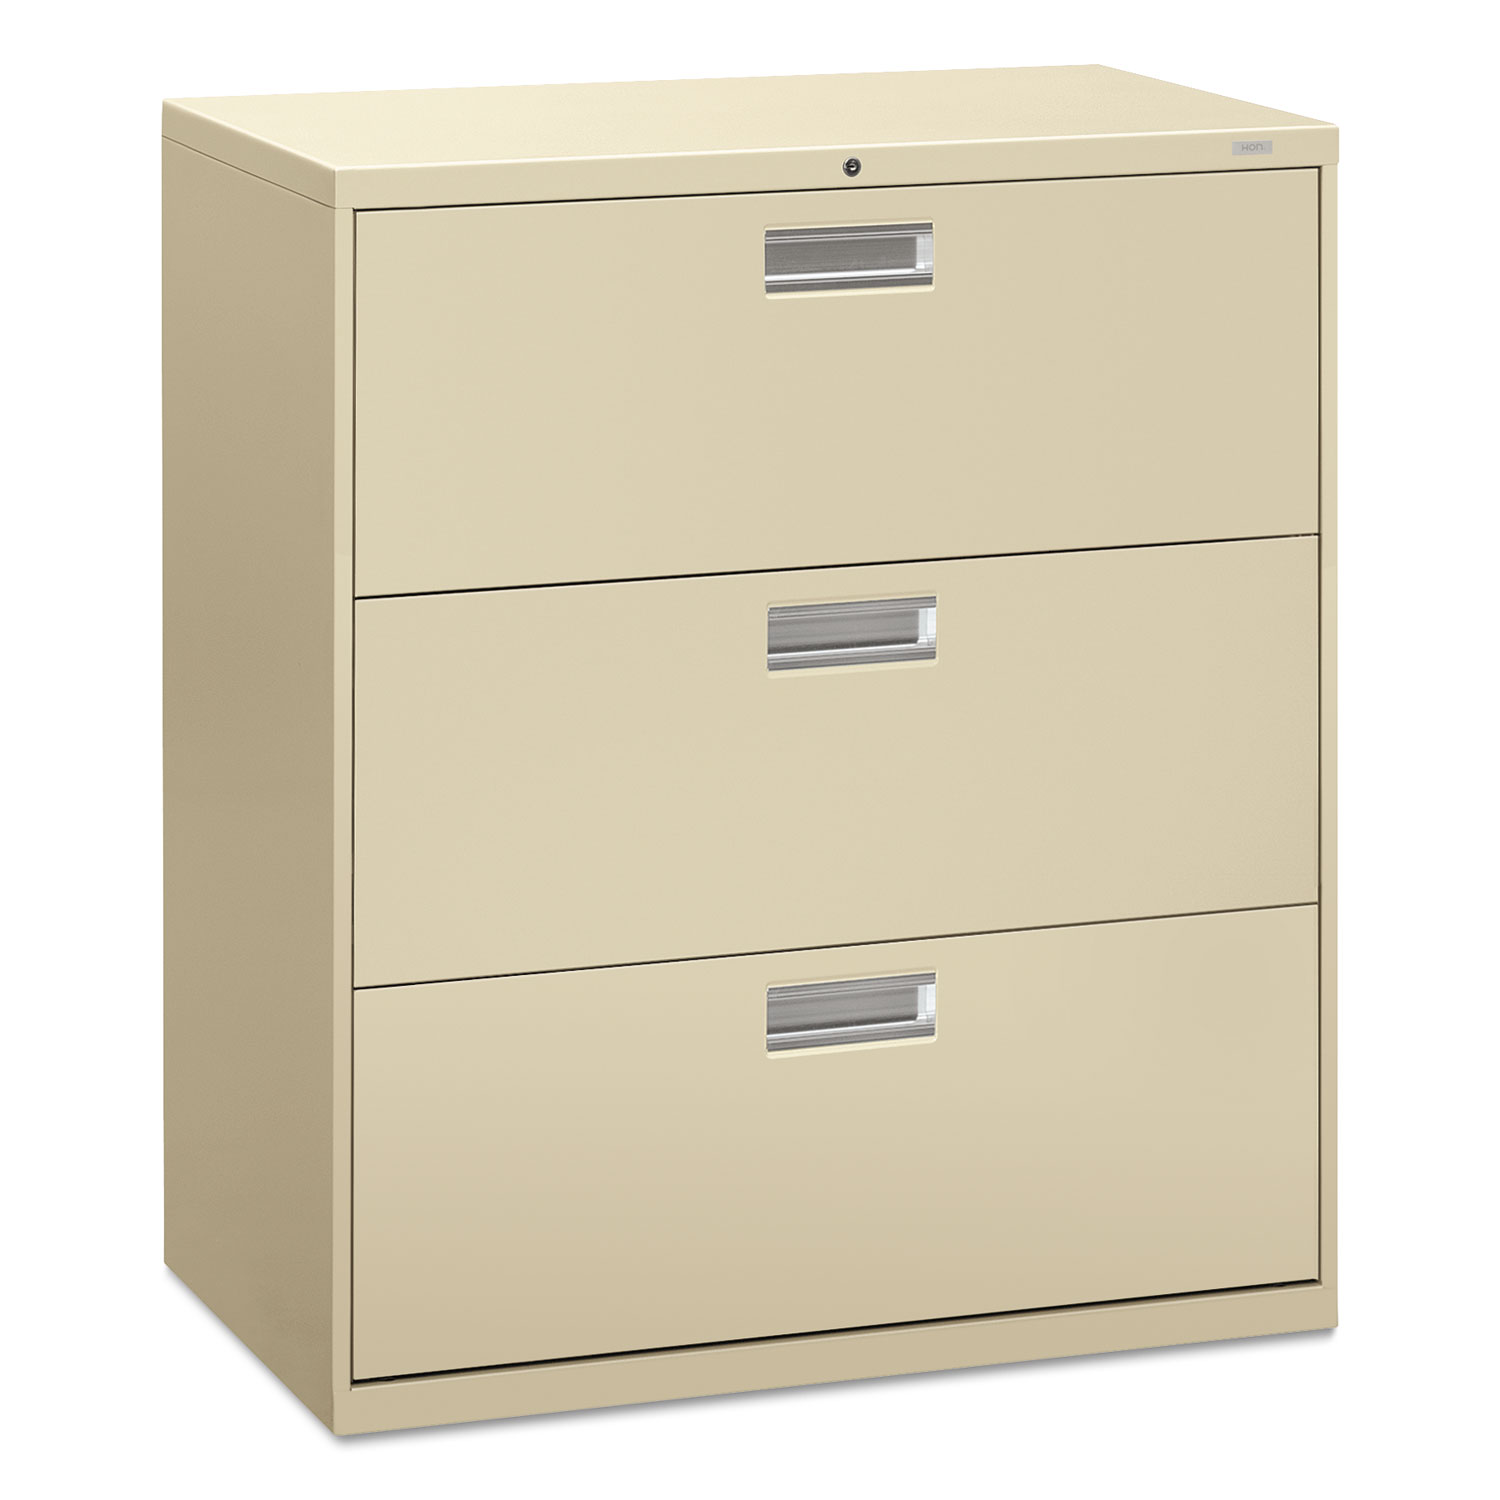 600 Series Three-Drawer Lateral File, 36w x 19-1/4d, Putty